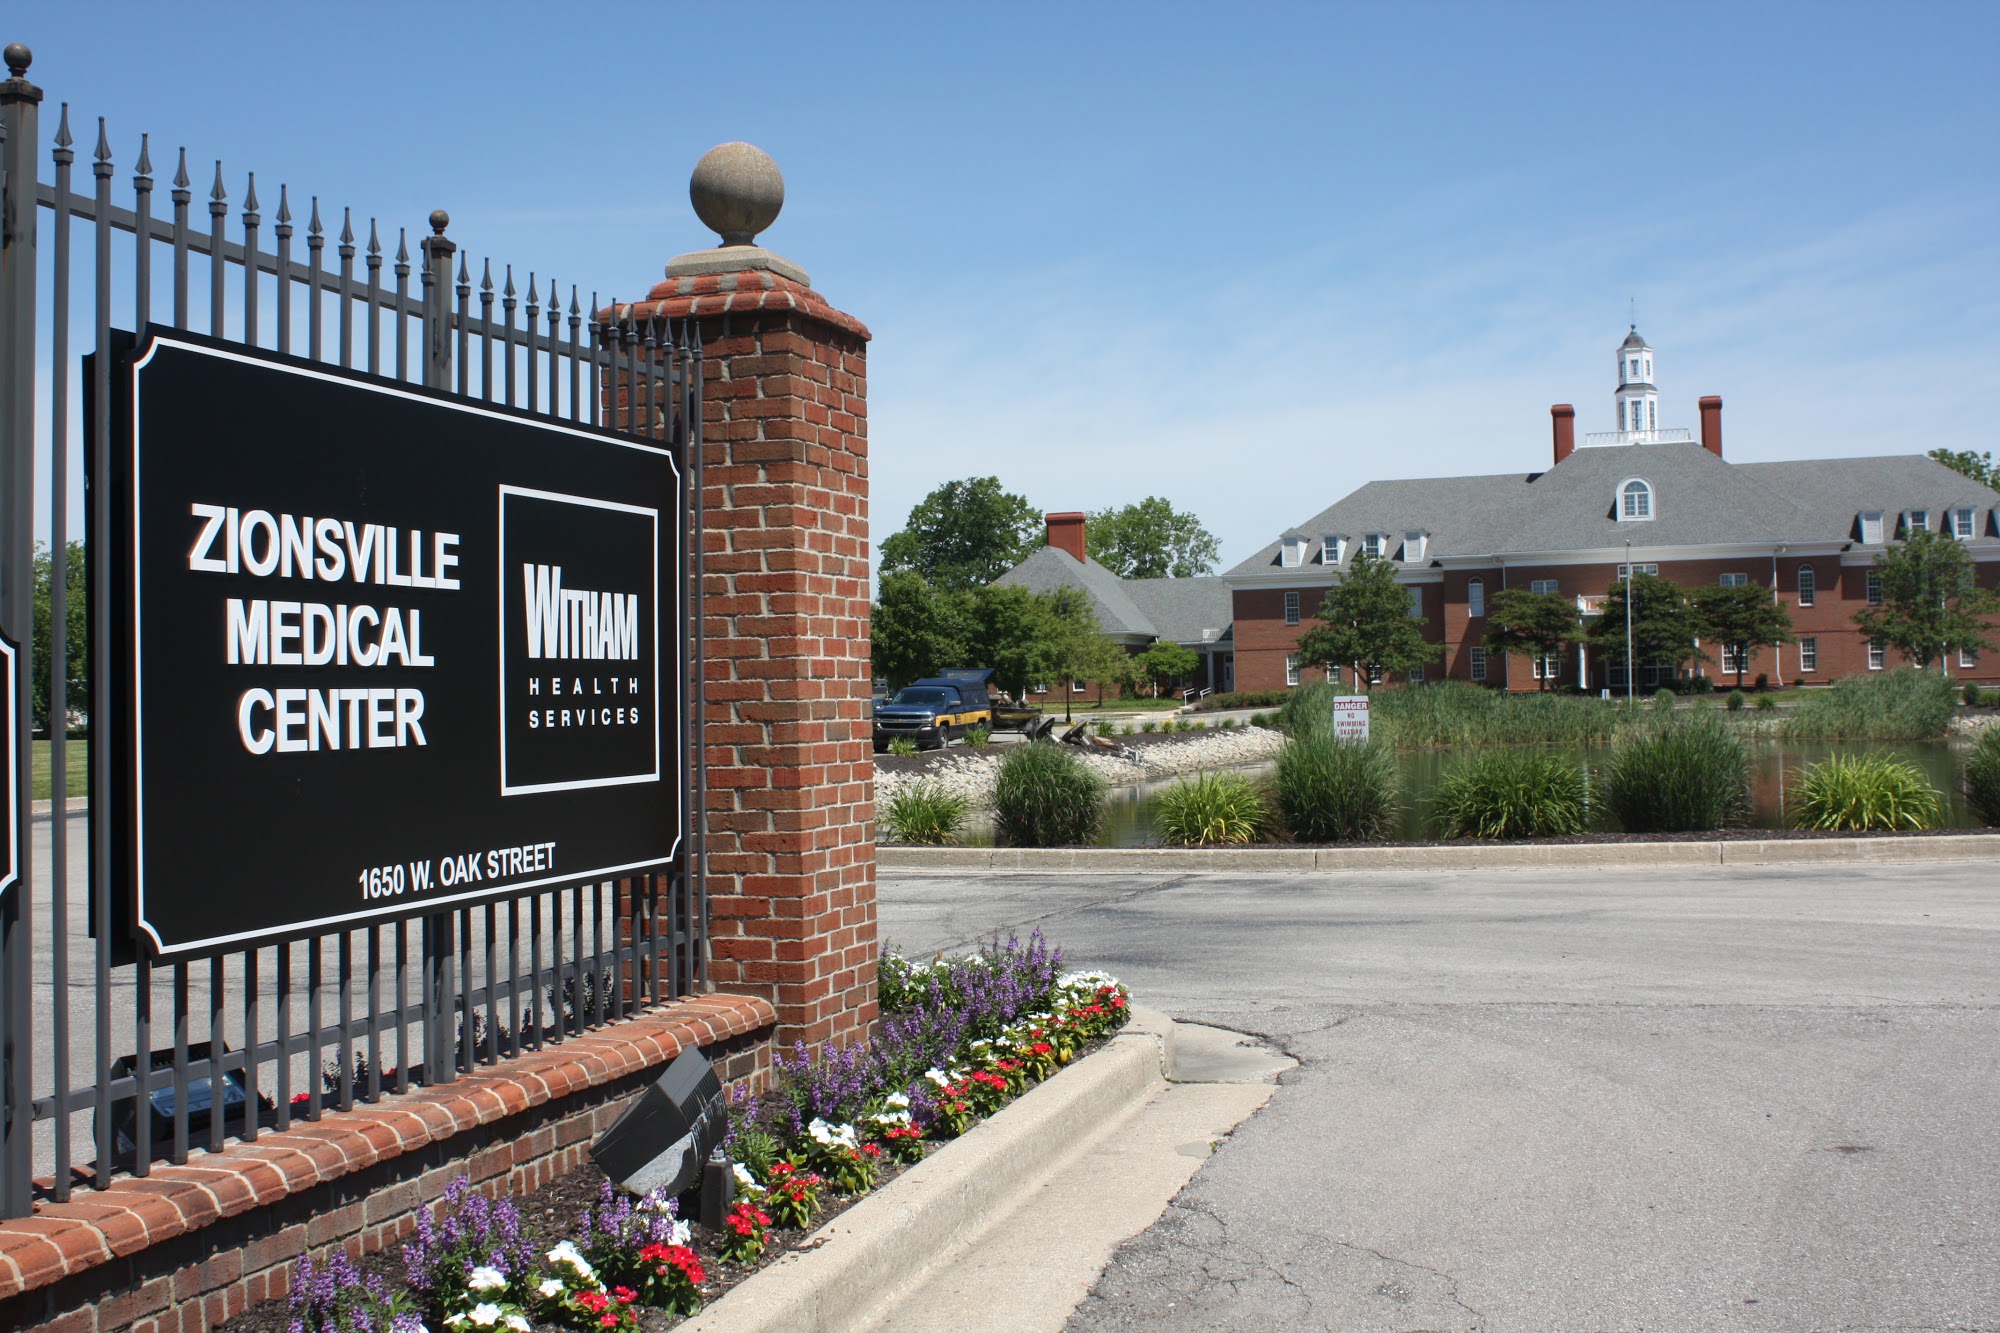 Witham Health Services: Zionsville Medical Center